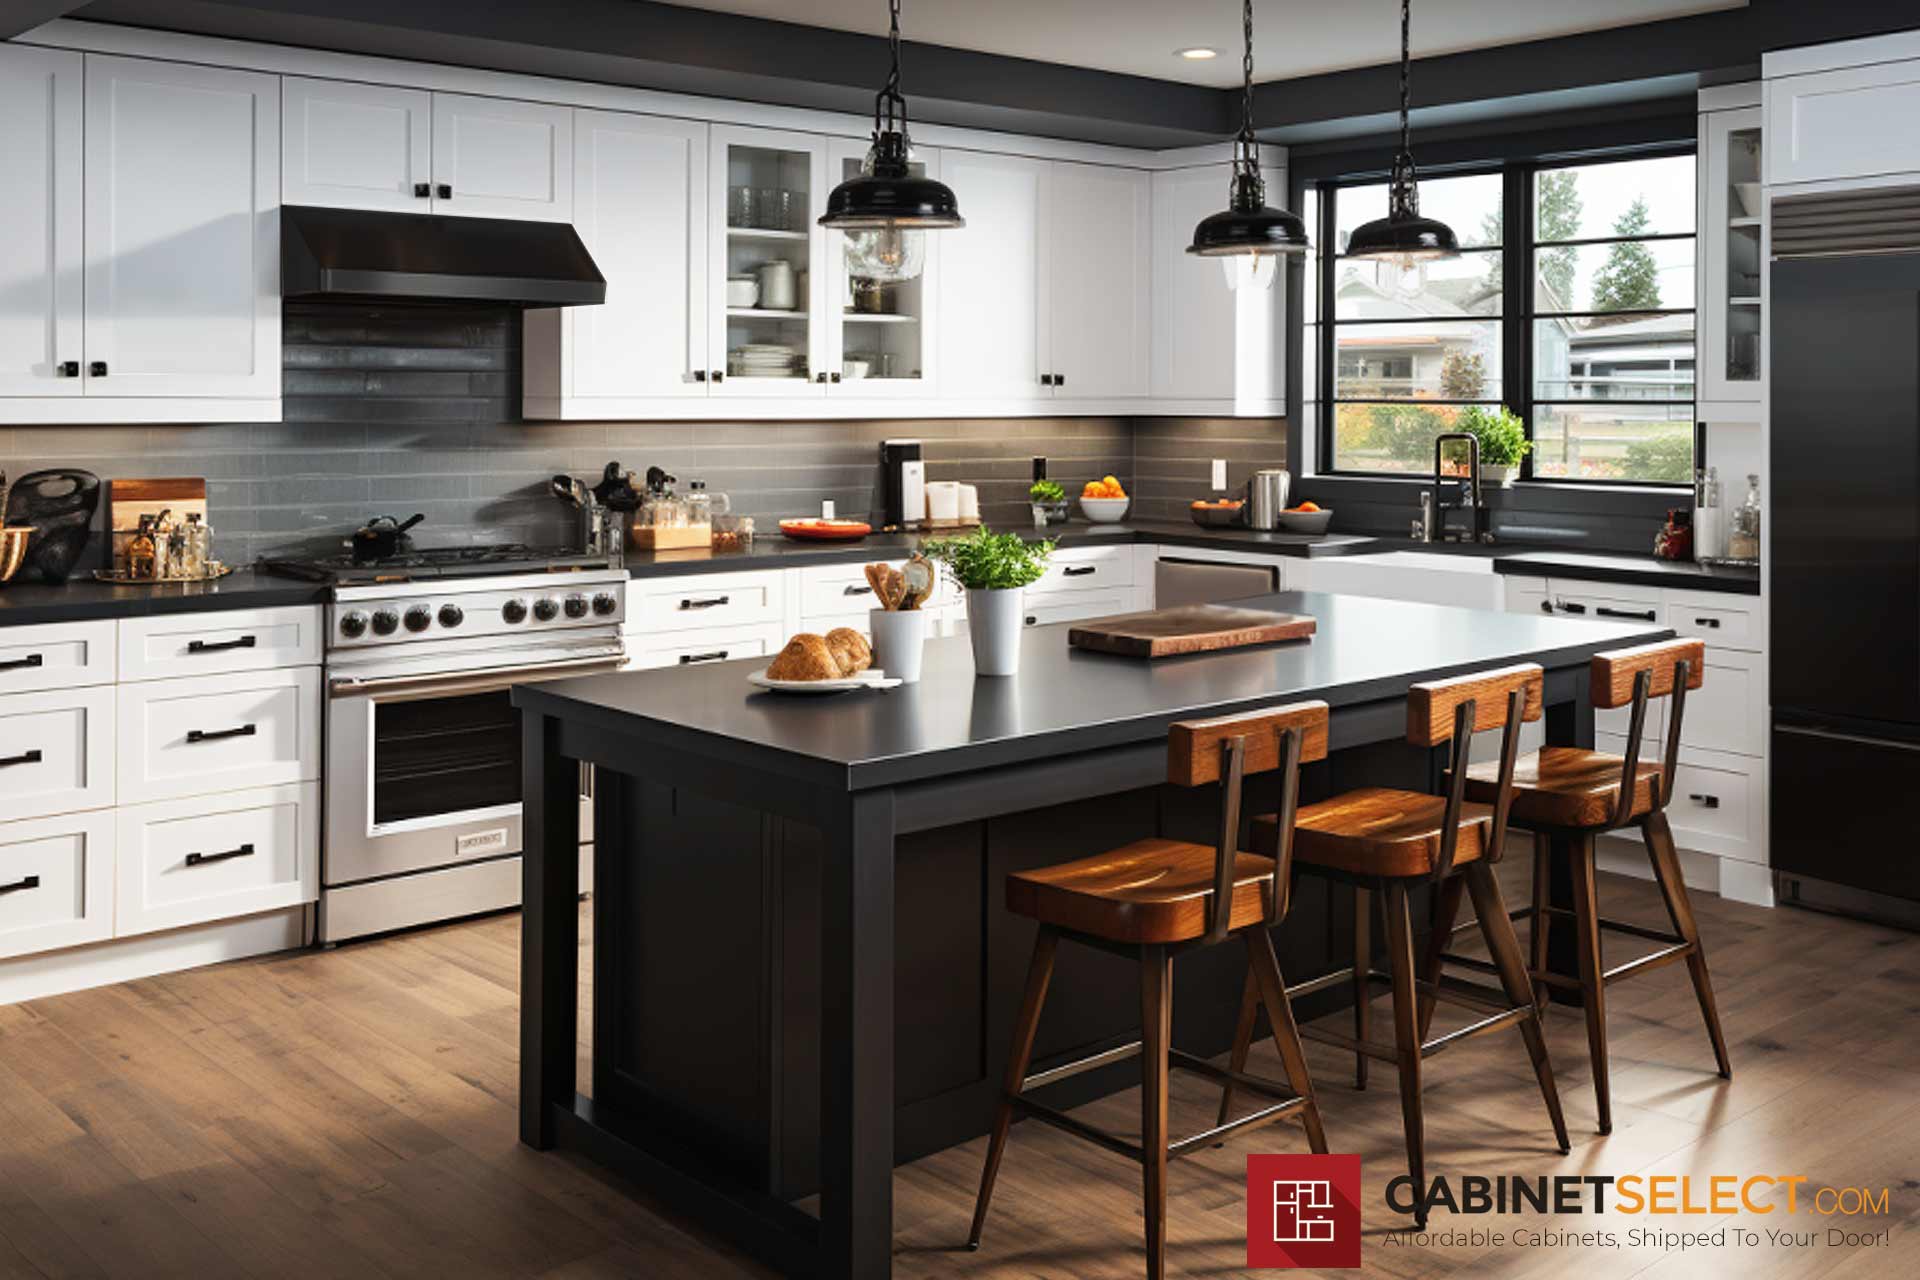 https://cabinetselect.com/cswp/wp-content/uploads/2023/08/Modern-Kitchen-with-Black-Appliances-1.jpg